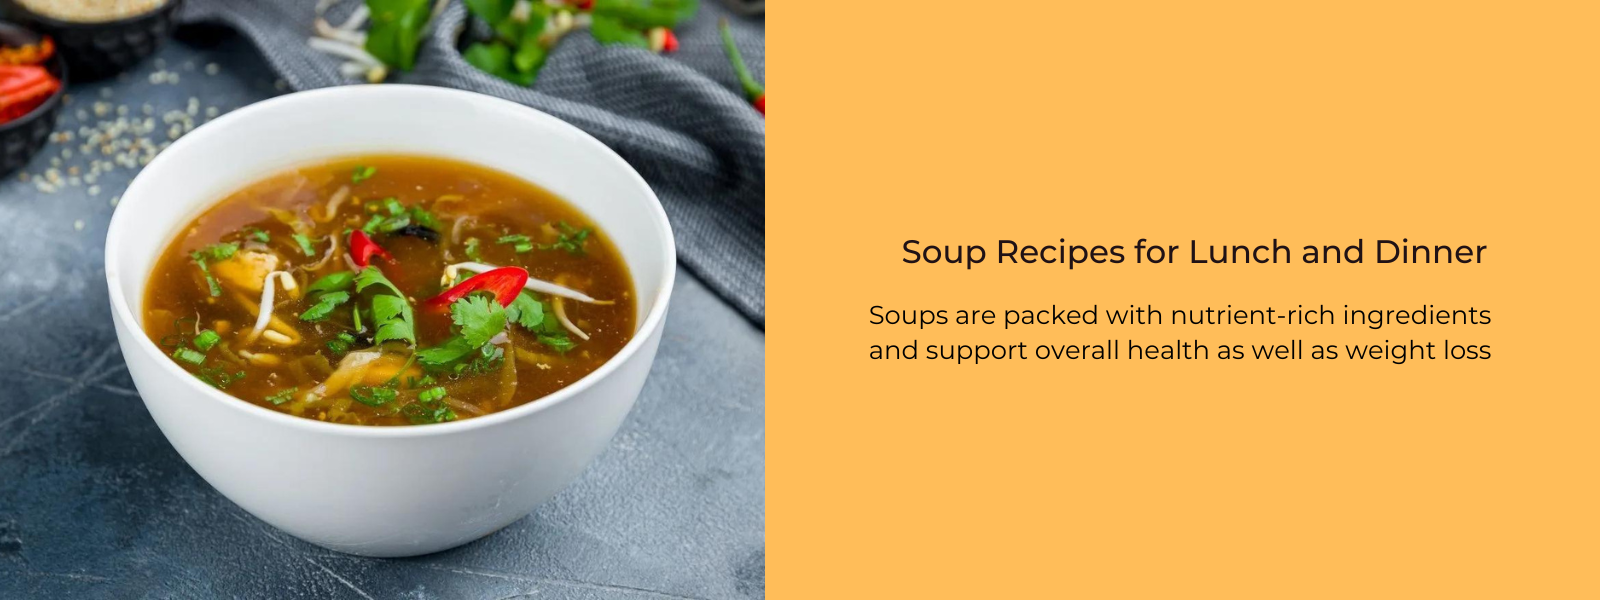 Healthy Soup Recipes for Lunch and Dinner